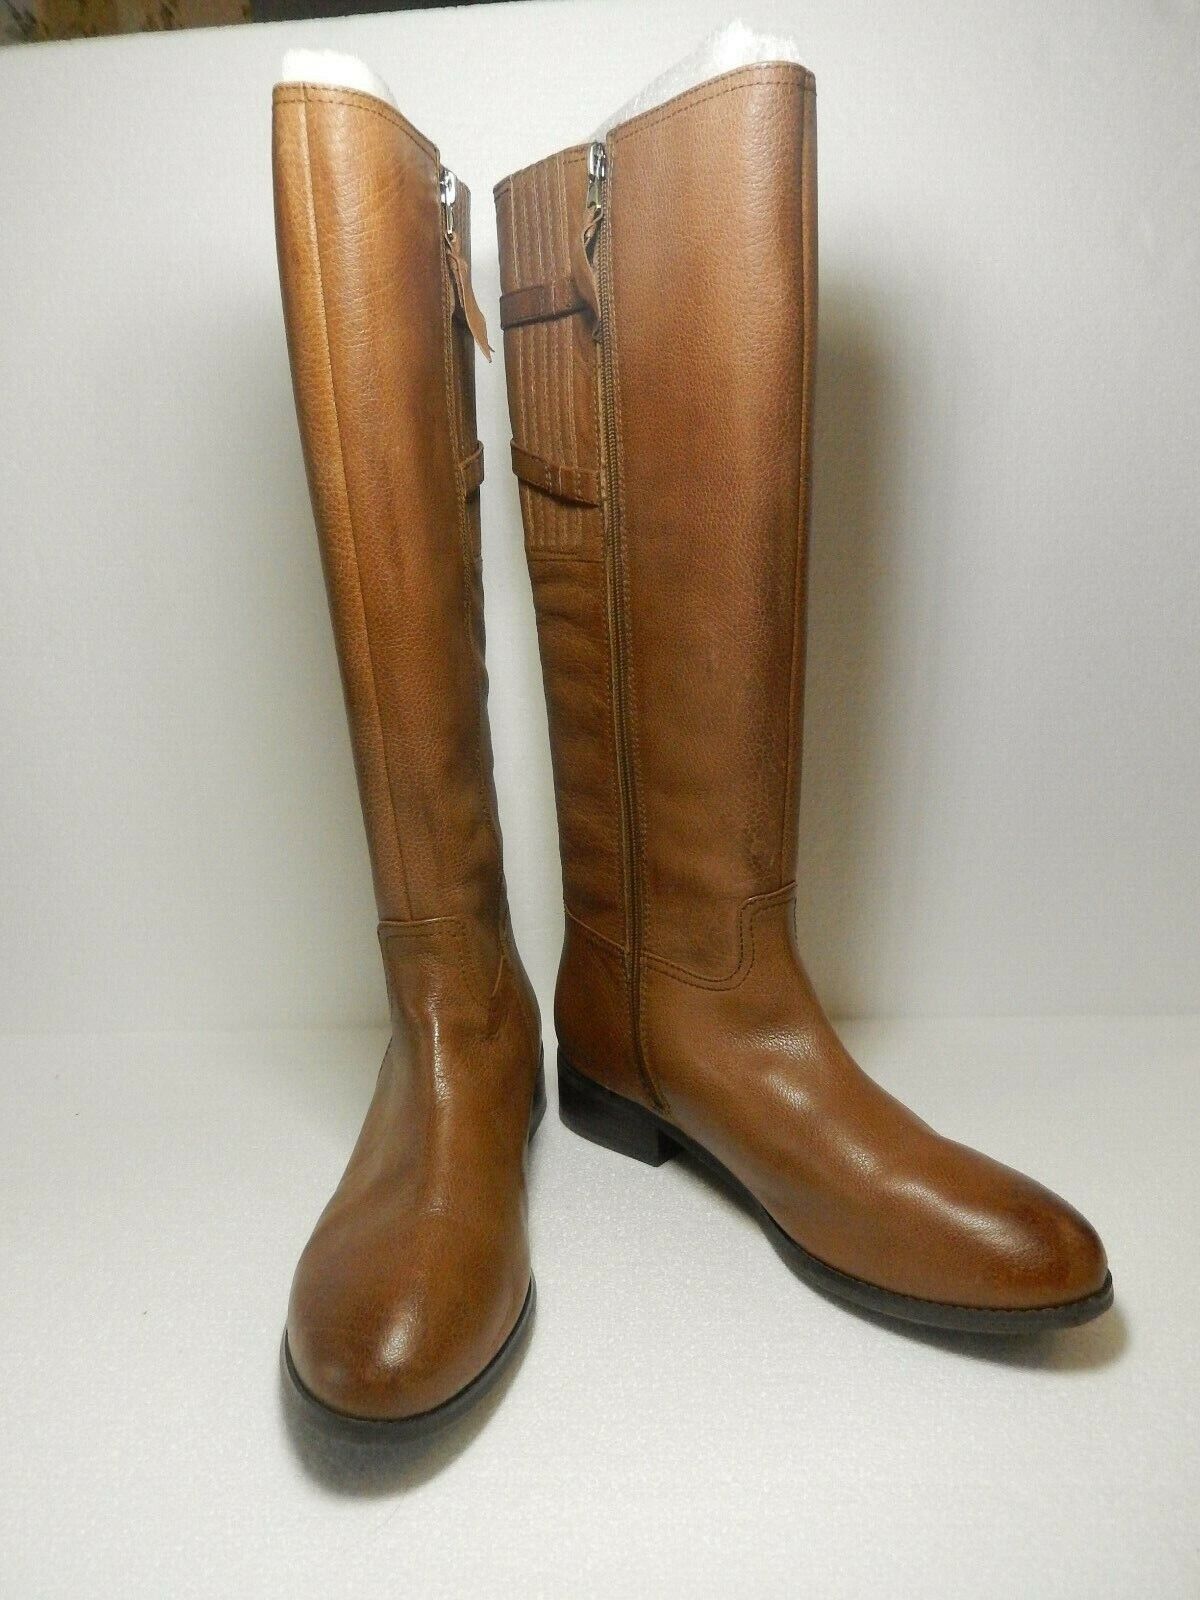 *New*  Trotters Women’s Lucky Too Wide Shaft Riding Cognac Brown Boots Size 12N